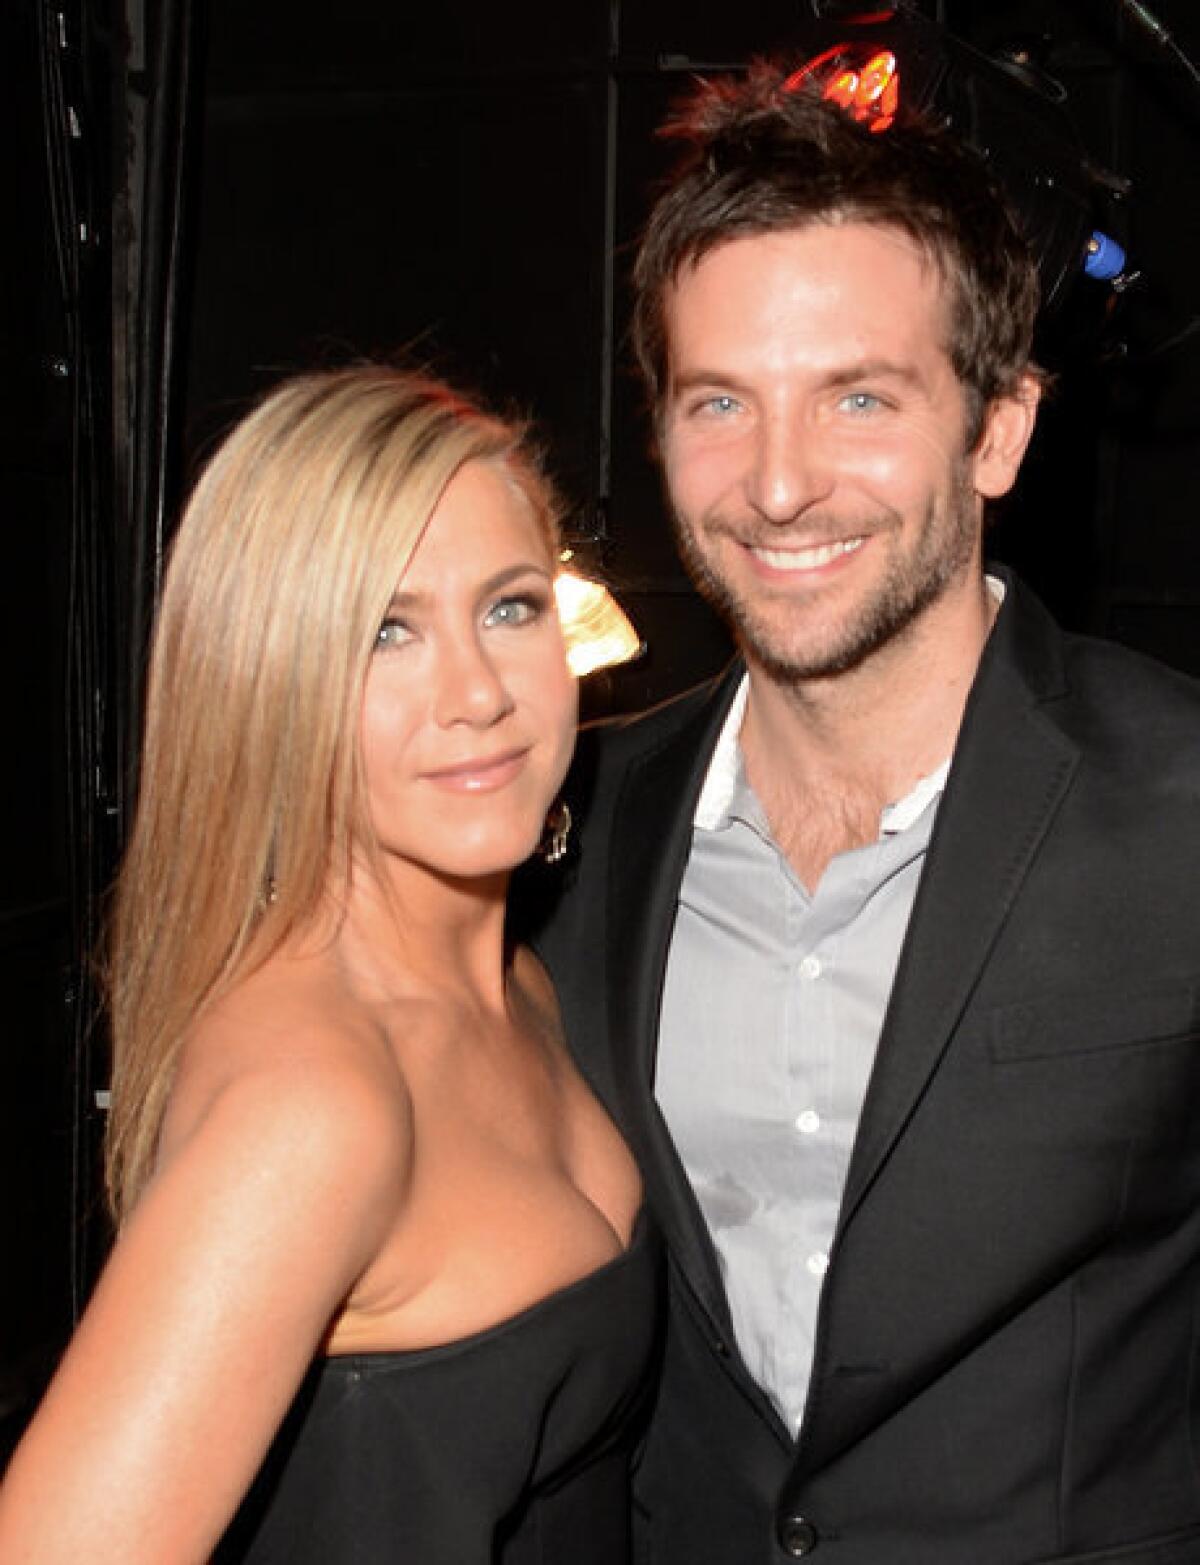 Jennifer Aniston, shown with Bradley Cooper this month at Spike TV's Guys Choice 2013 awards, will appear in Saks Fifth Avenue ads promoting a cancer-research fundraising campaign.